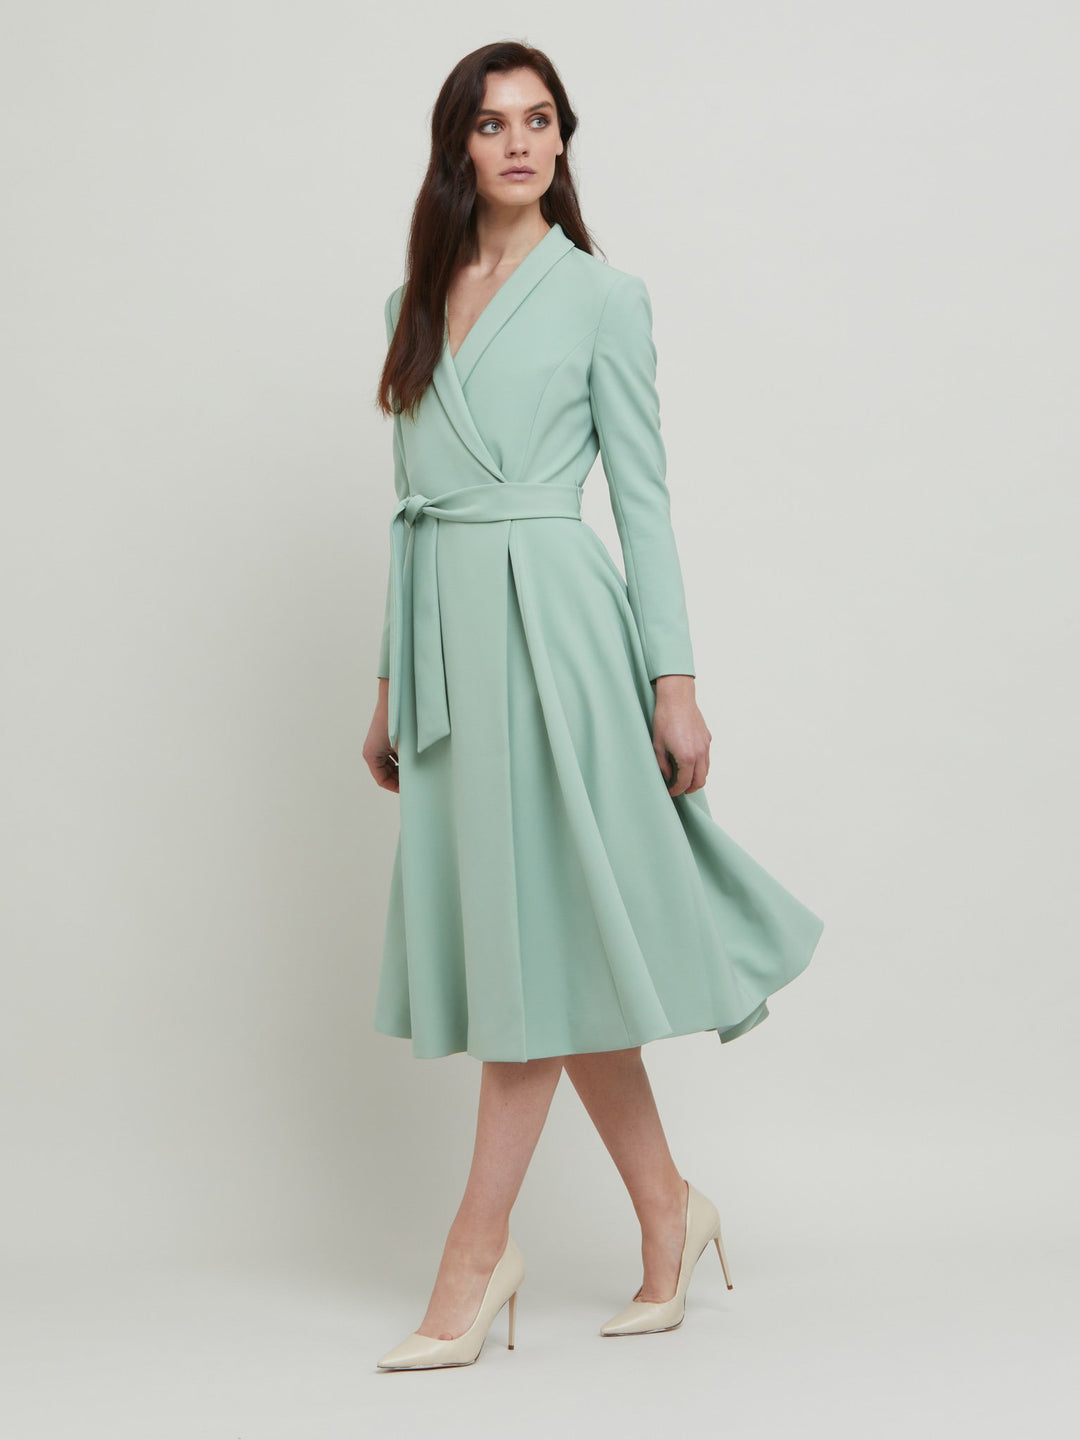 Dawn, the ultimate coat dress. Neat shawl collar, flattering fit & flare shape with handy pockets and an elegant full skirt that falls below the knee. Crafted in our signature double crepe with a hint of stretch in willow green. Attending a summer wedding? Mother of the bride? Heading to the races? This is the dress for you.